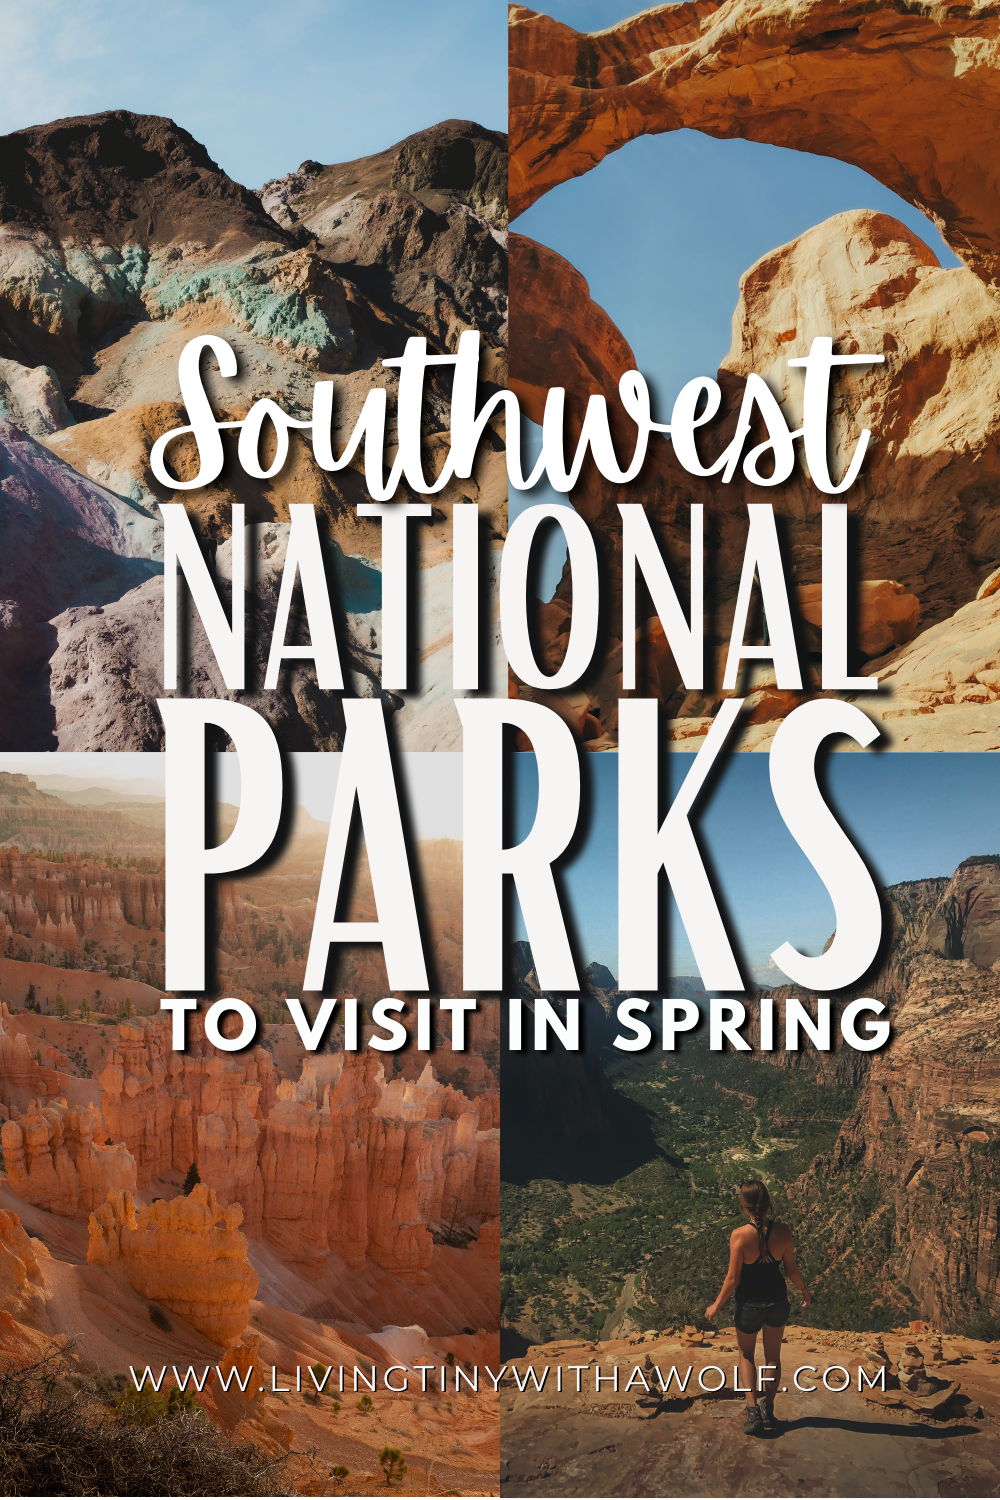 20 National Parks in the Southwest US to Visit in the Spring